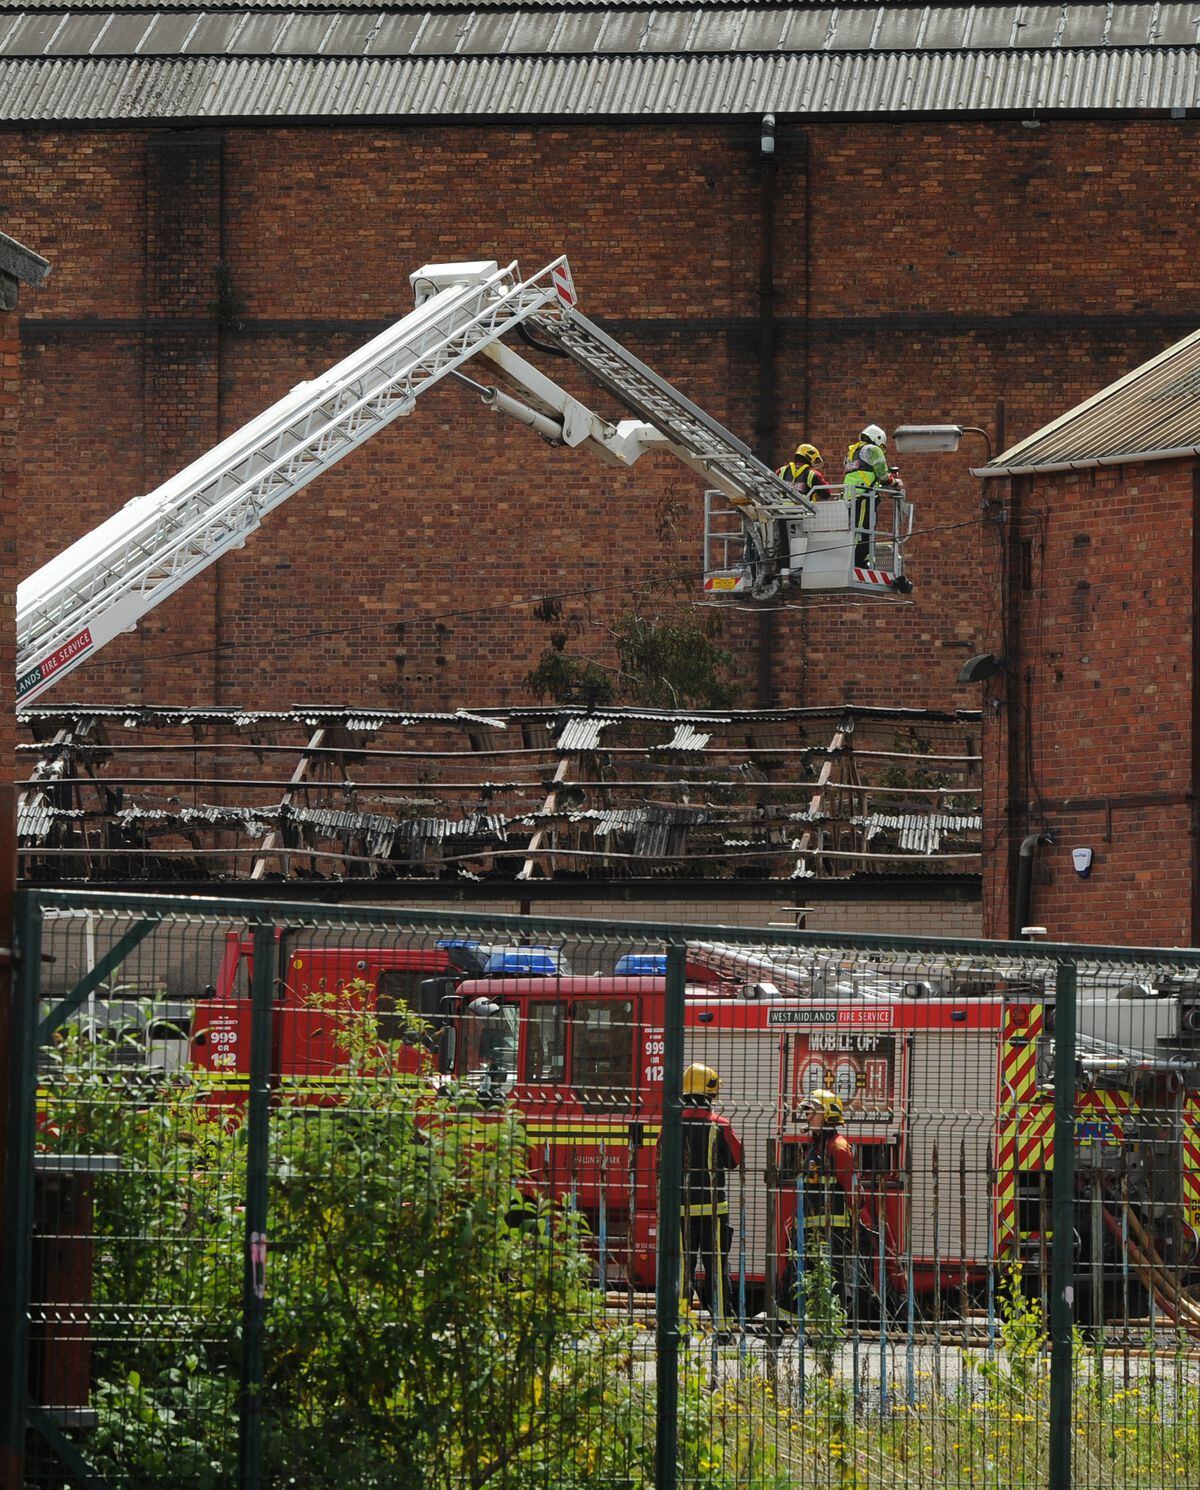 A hydraulic platform was used to tackle the blaze